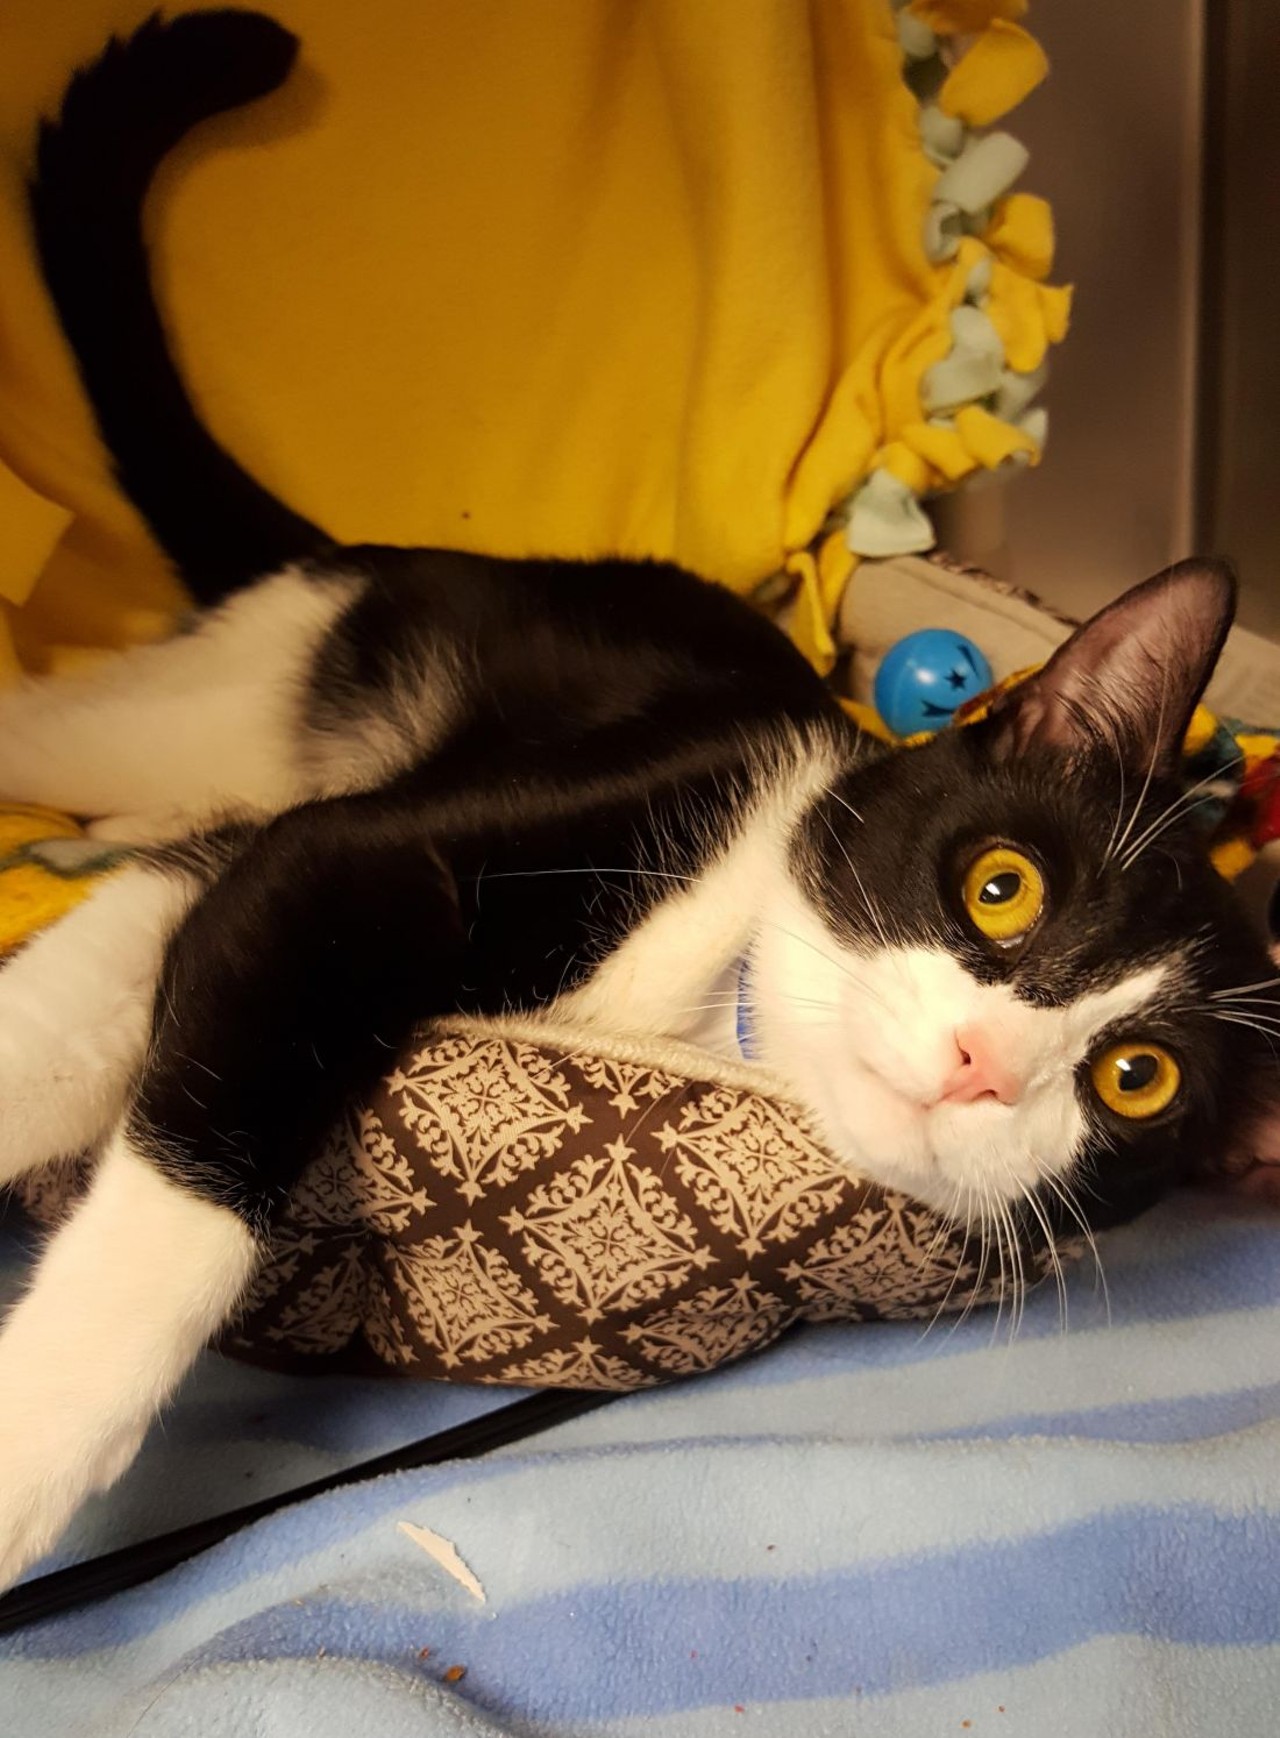 NAME: Rudy
GENDER: Male
BREED: Domestic Short Hair
AGE: 1 years, 4 months
WEIGHT: 9 pounds
SPECIAL CONSIDERATIONS: None
REASON I CAME TO MHS: Owner surrender
LOCATION: Rochester Hills Center for Animal Care
ID NUMBER: 864282